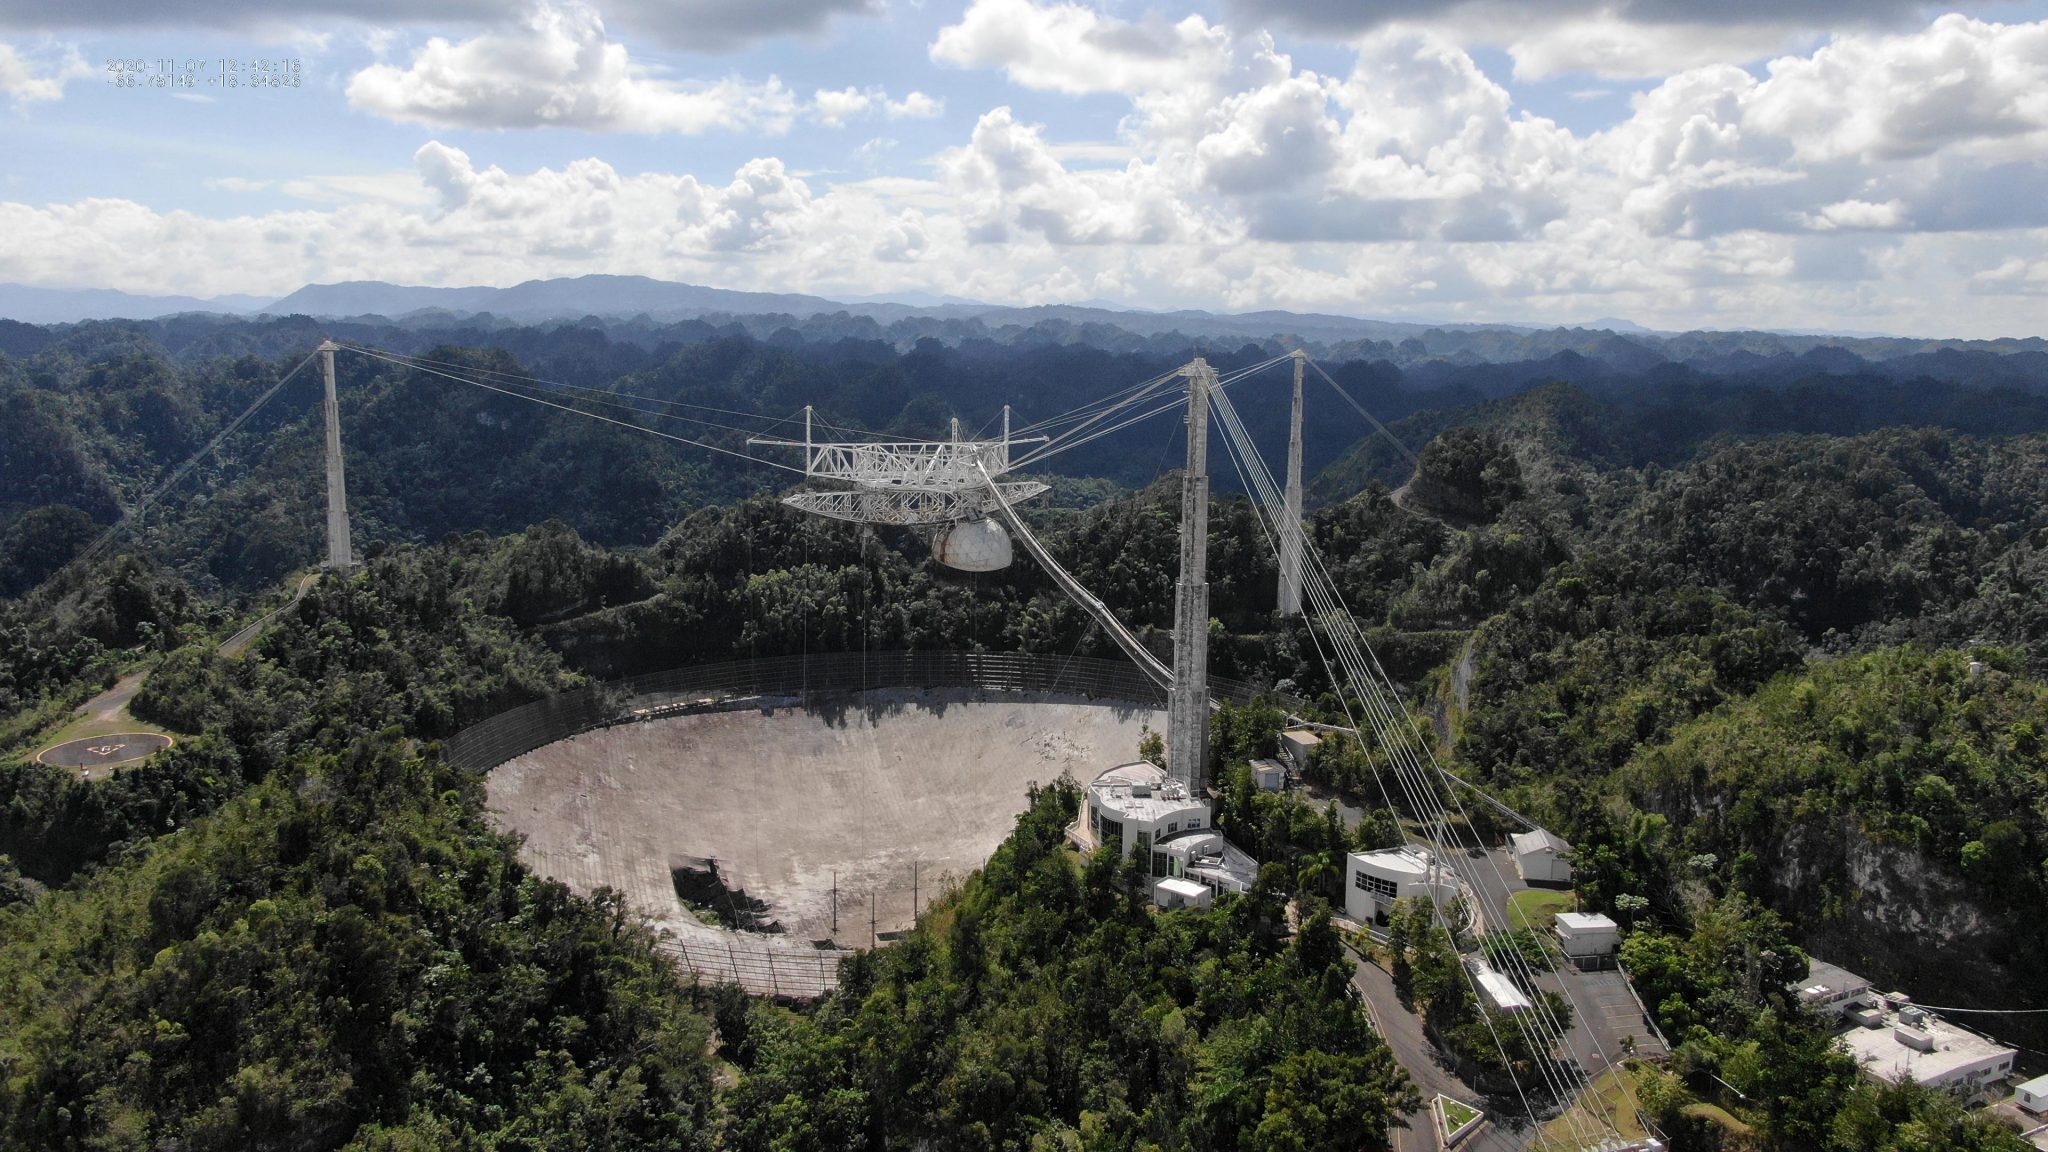 Its The End For Iconic 1000 Foot Wide Telescope At Arecibo Observatory After Second Cable Break 5138